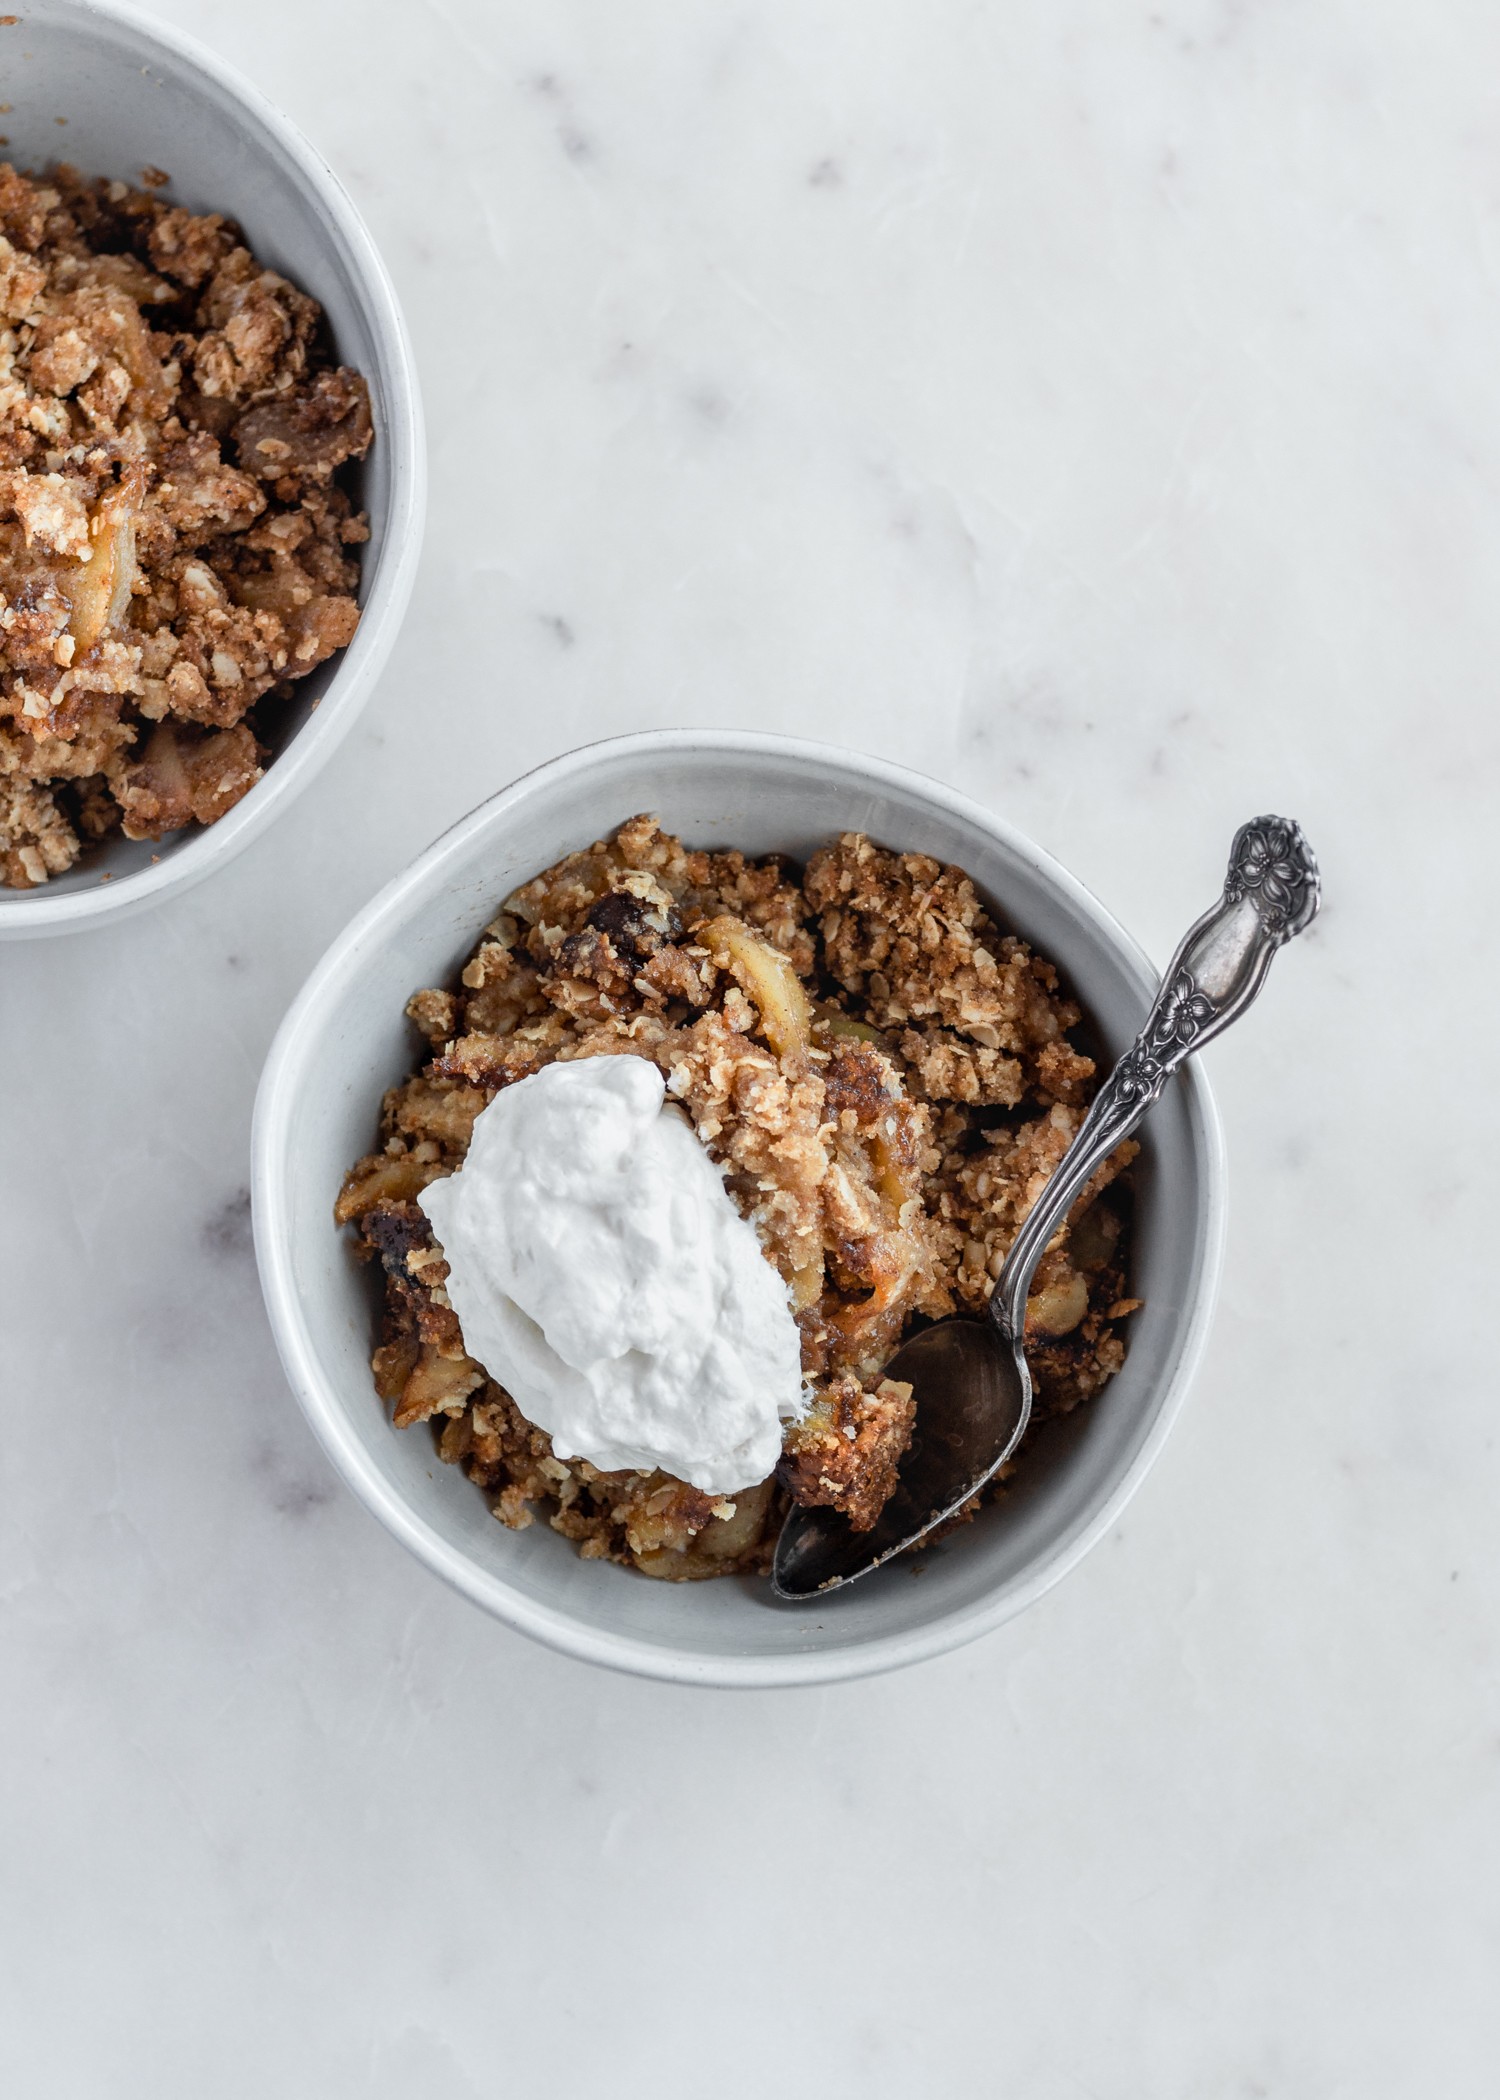 Gluten Free Apple Crisp with a nutty, oaty topping and Irish whiskey.